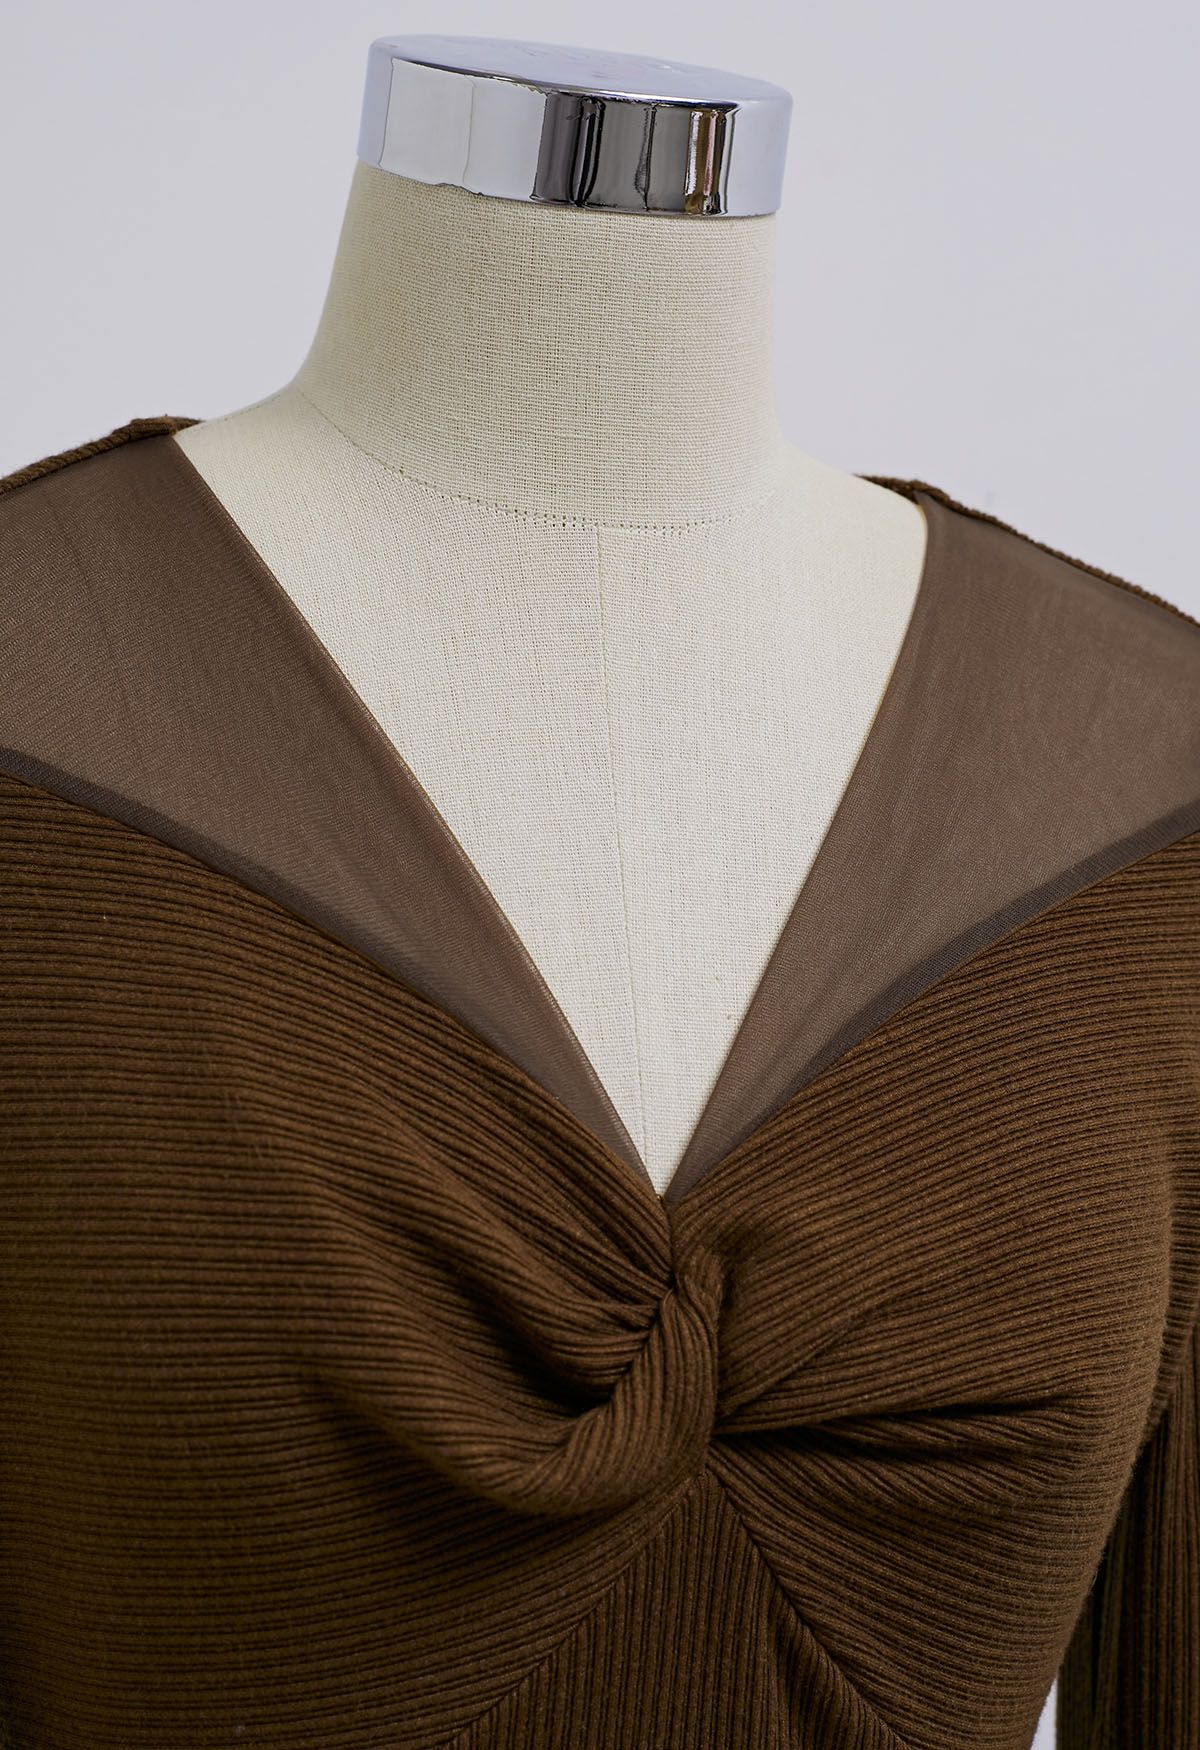 Twisted Mesh Spliced Knit Top in Brown